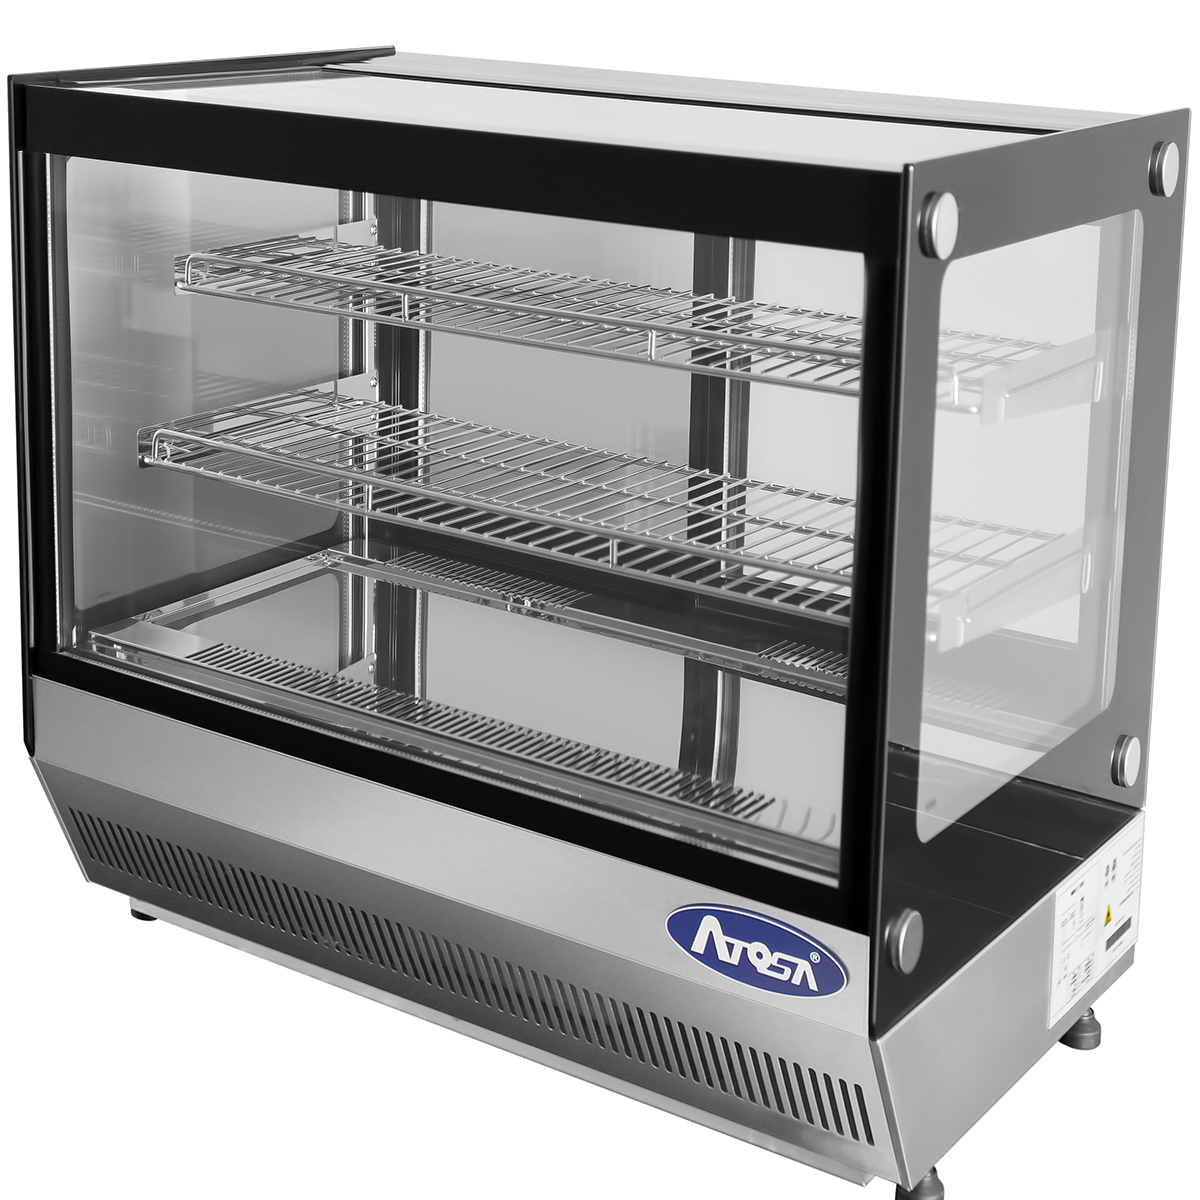 Atosa CRDS-42 Refrigerated Countertop Display Case, 4.2 Cu. Ft., Flat Glass - 27-3/5"W x 22-1/10"D x 26-2/5"H image 2